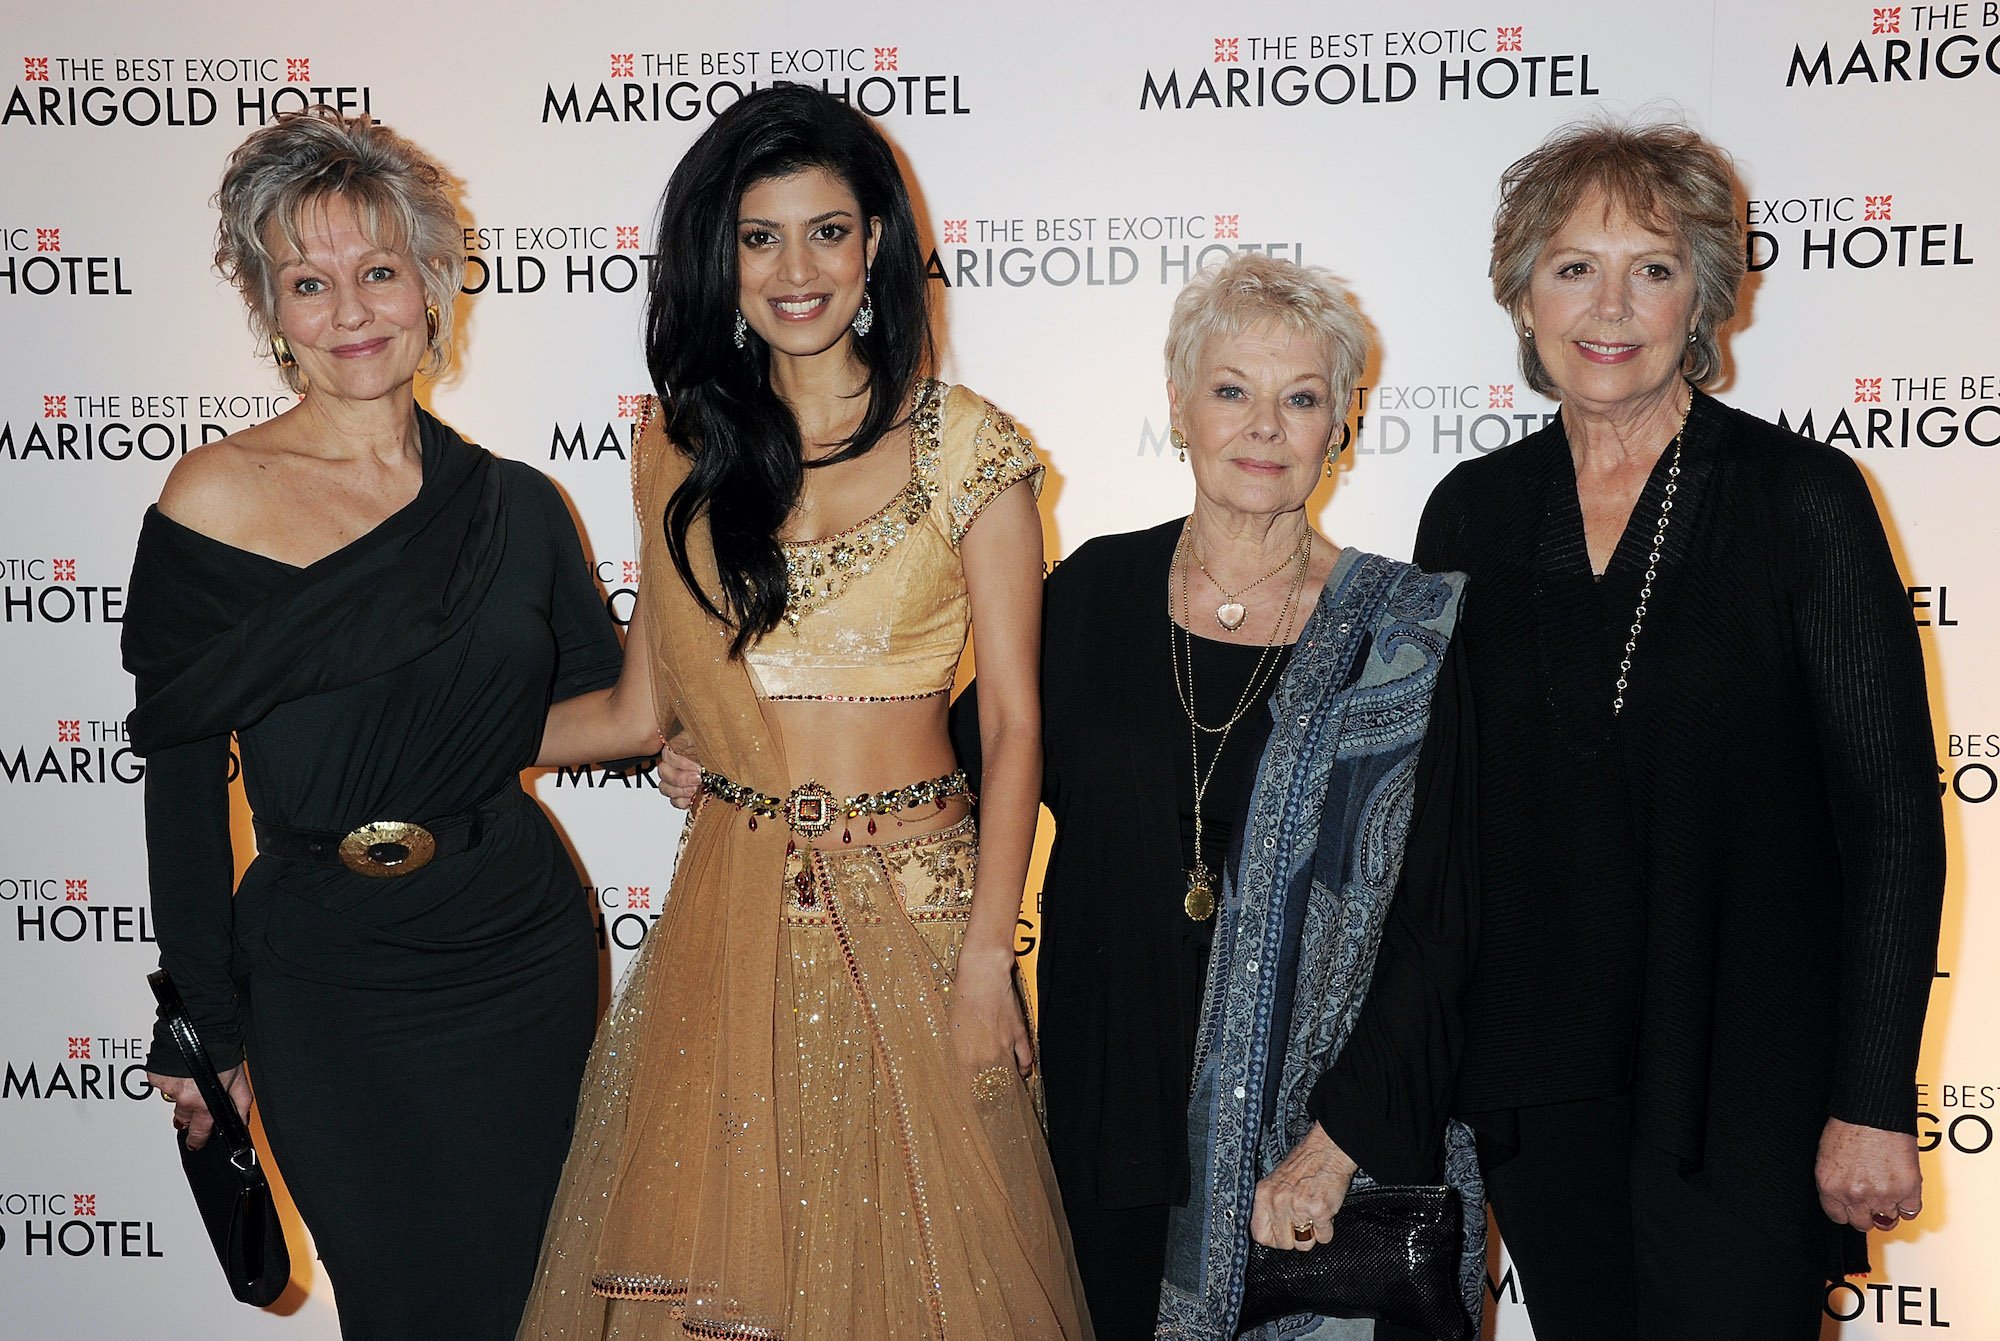 Cast members of 'The Best Exotic Marigold Hotel' smiling in front of a white background